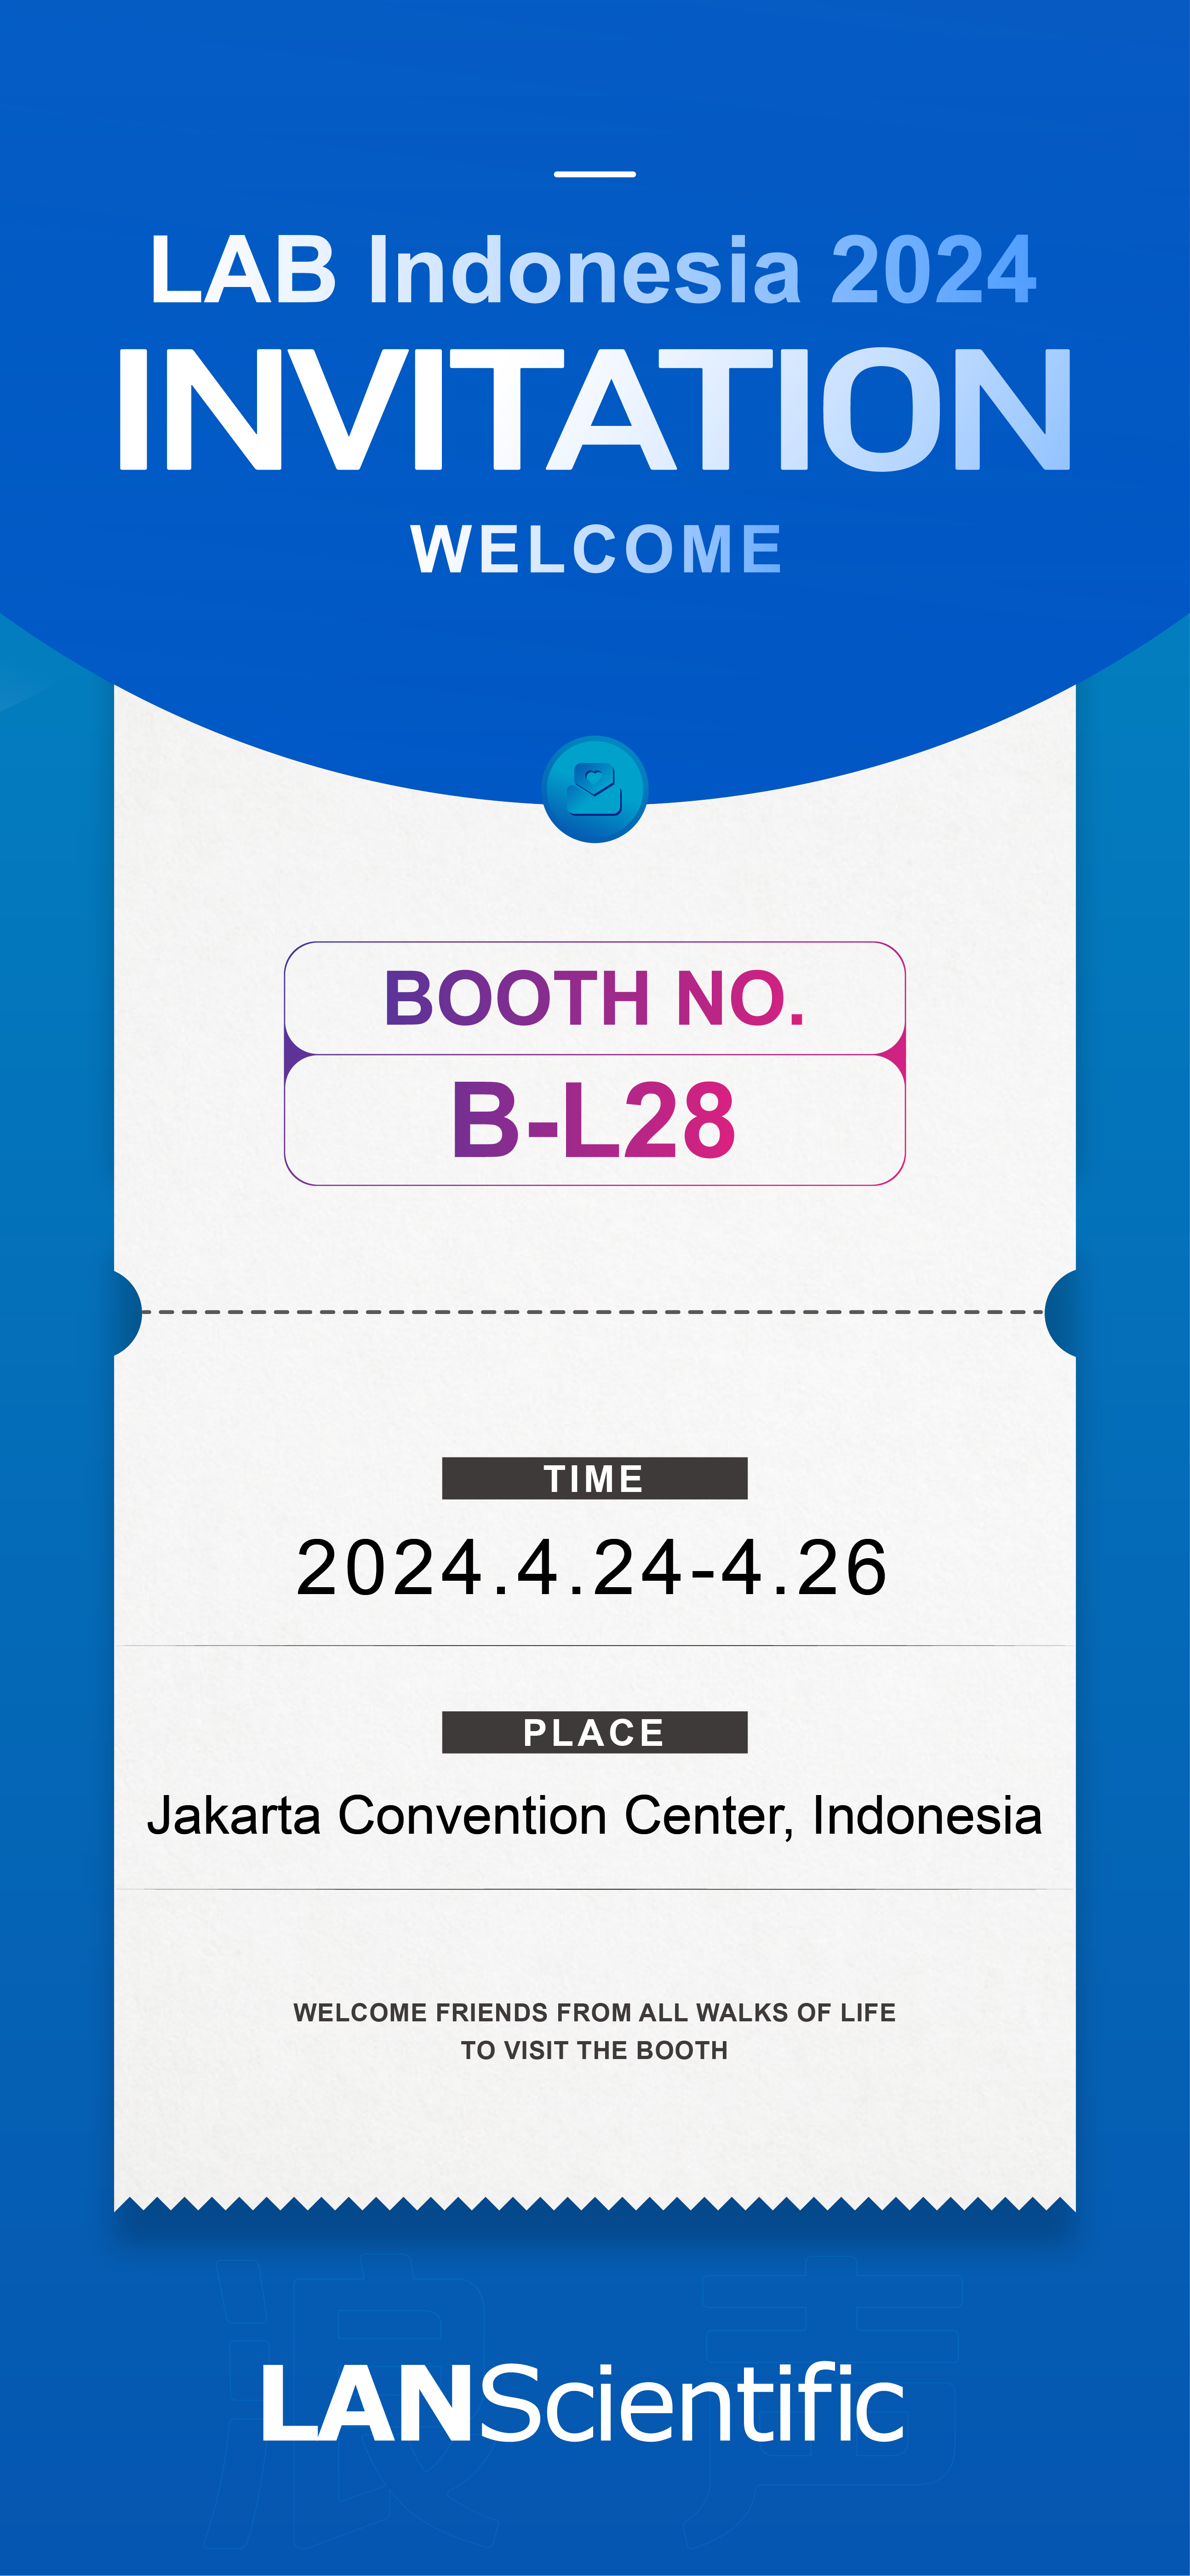 Meet at LAB Indonesia 2024, we are waiting for you at booth B-L28!(图1)